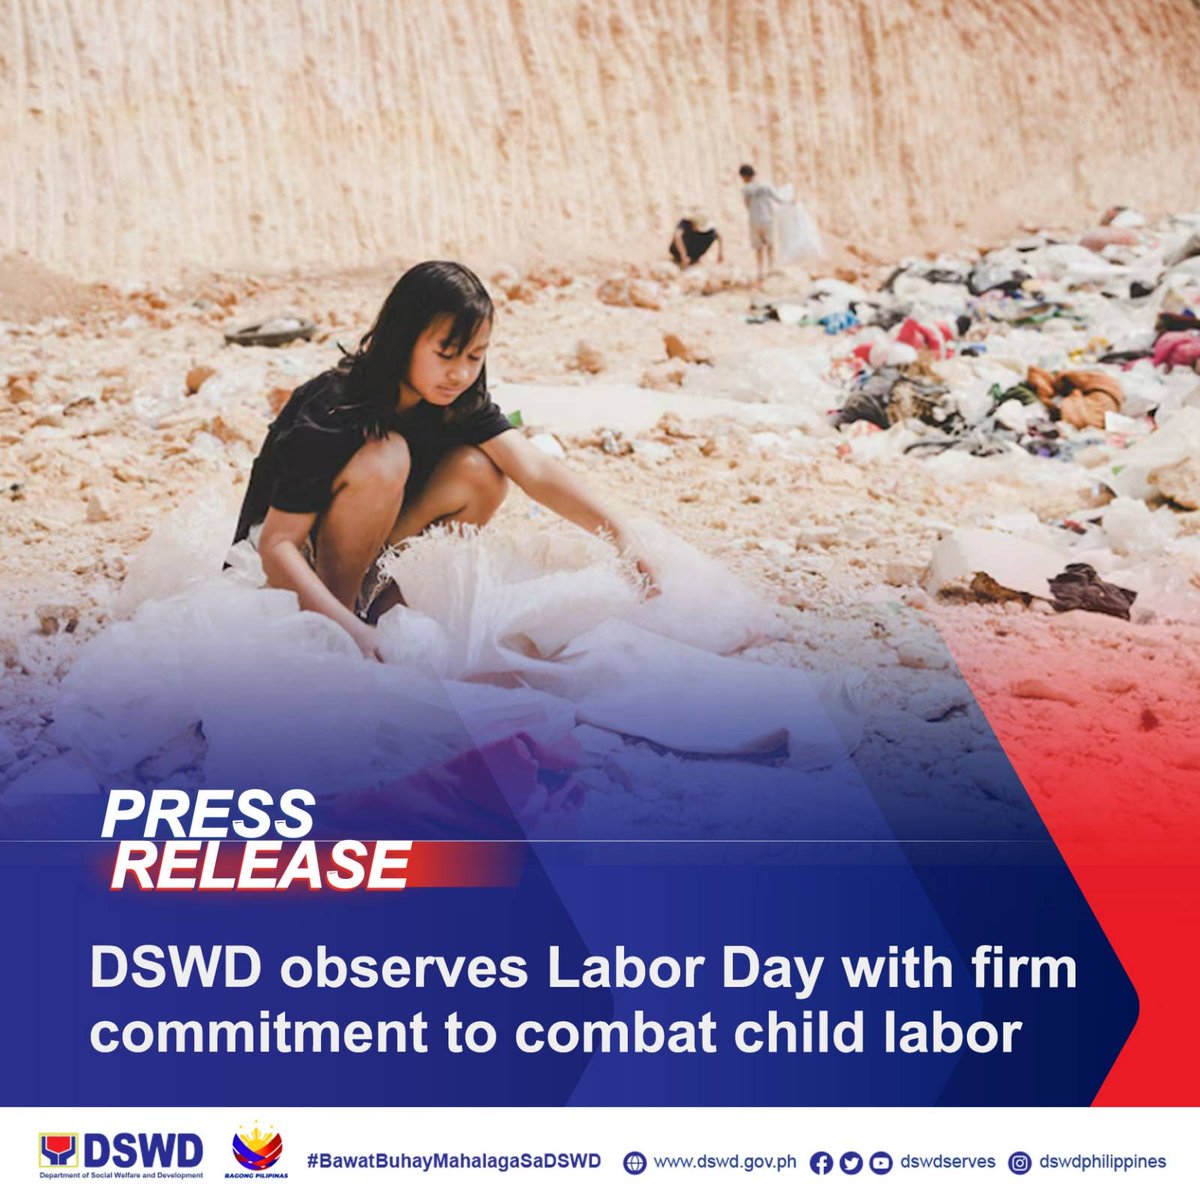 𝗗𝗦𝗪𝗗 𝗣𝗥𝗘𝗦𝗦 𝗥𝗘𝗟𝗘𝗔𝗦𝗘: DSWD observes Labor Day with firm commitment to combat child labor As the nation celebrates Labor Day on Wednesday (May 1), the Department of Social Welfare and Development (DSWD) has reaffirmed its unwavering dedication to protecting the…